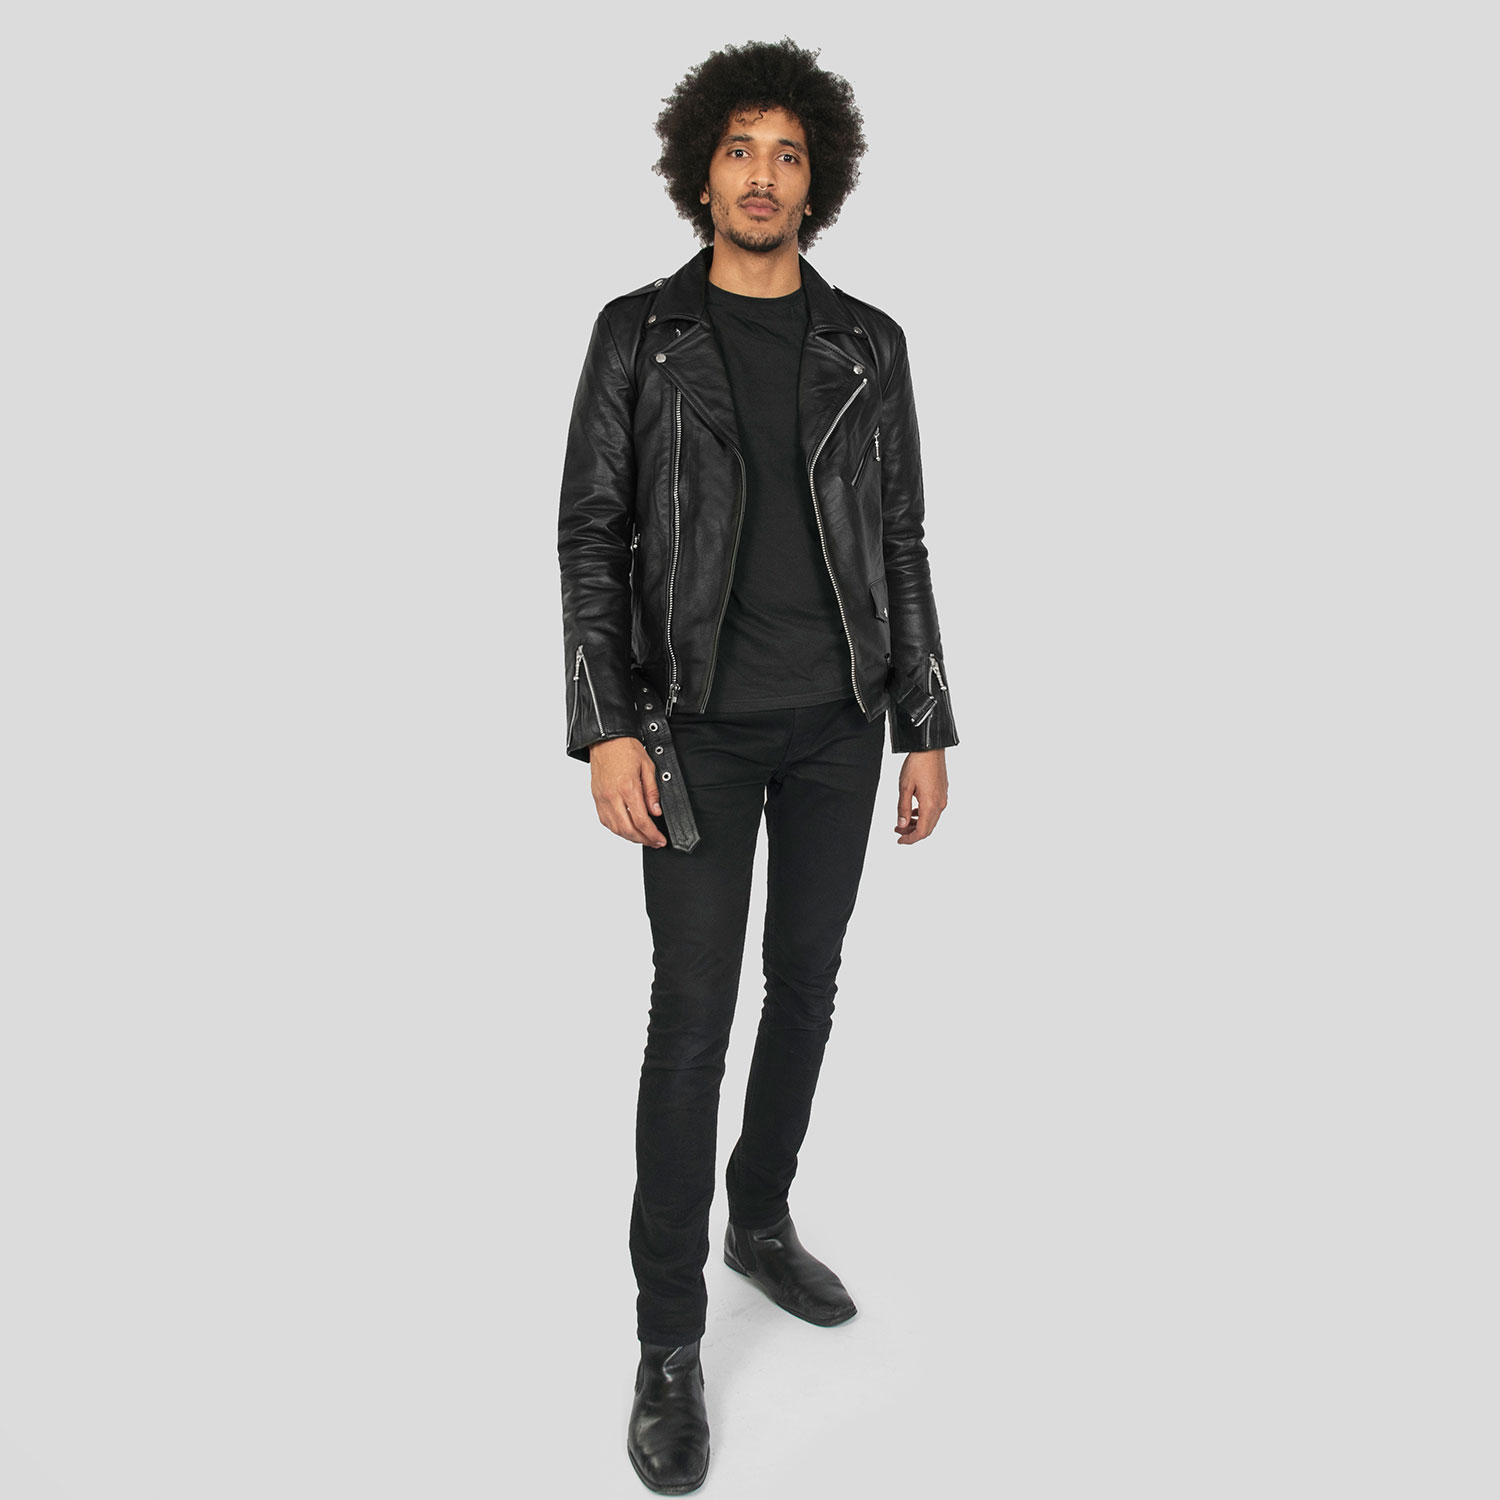 Commando Long - For Tall Men - Black and Nickel Leather Jacket | Straight  To Hell Apparel